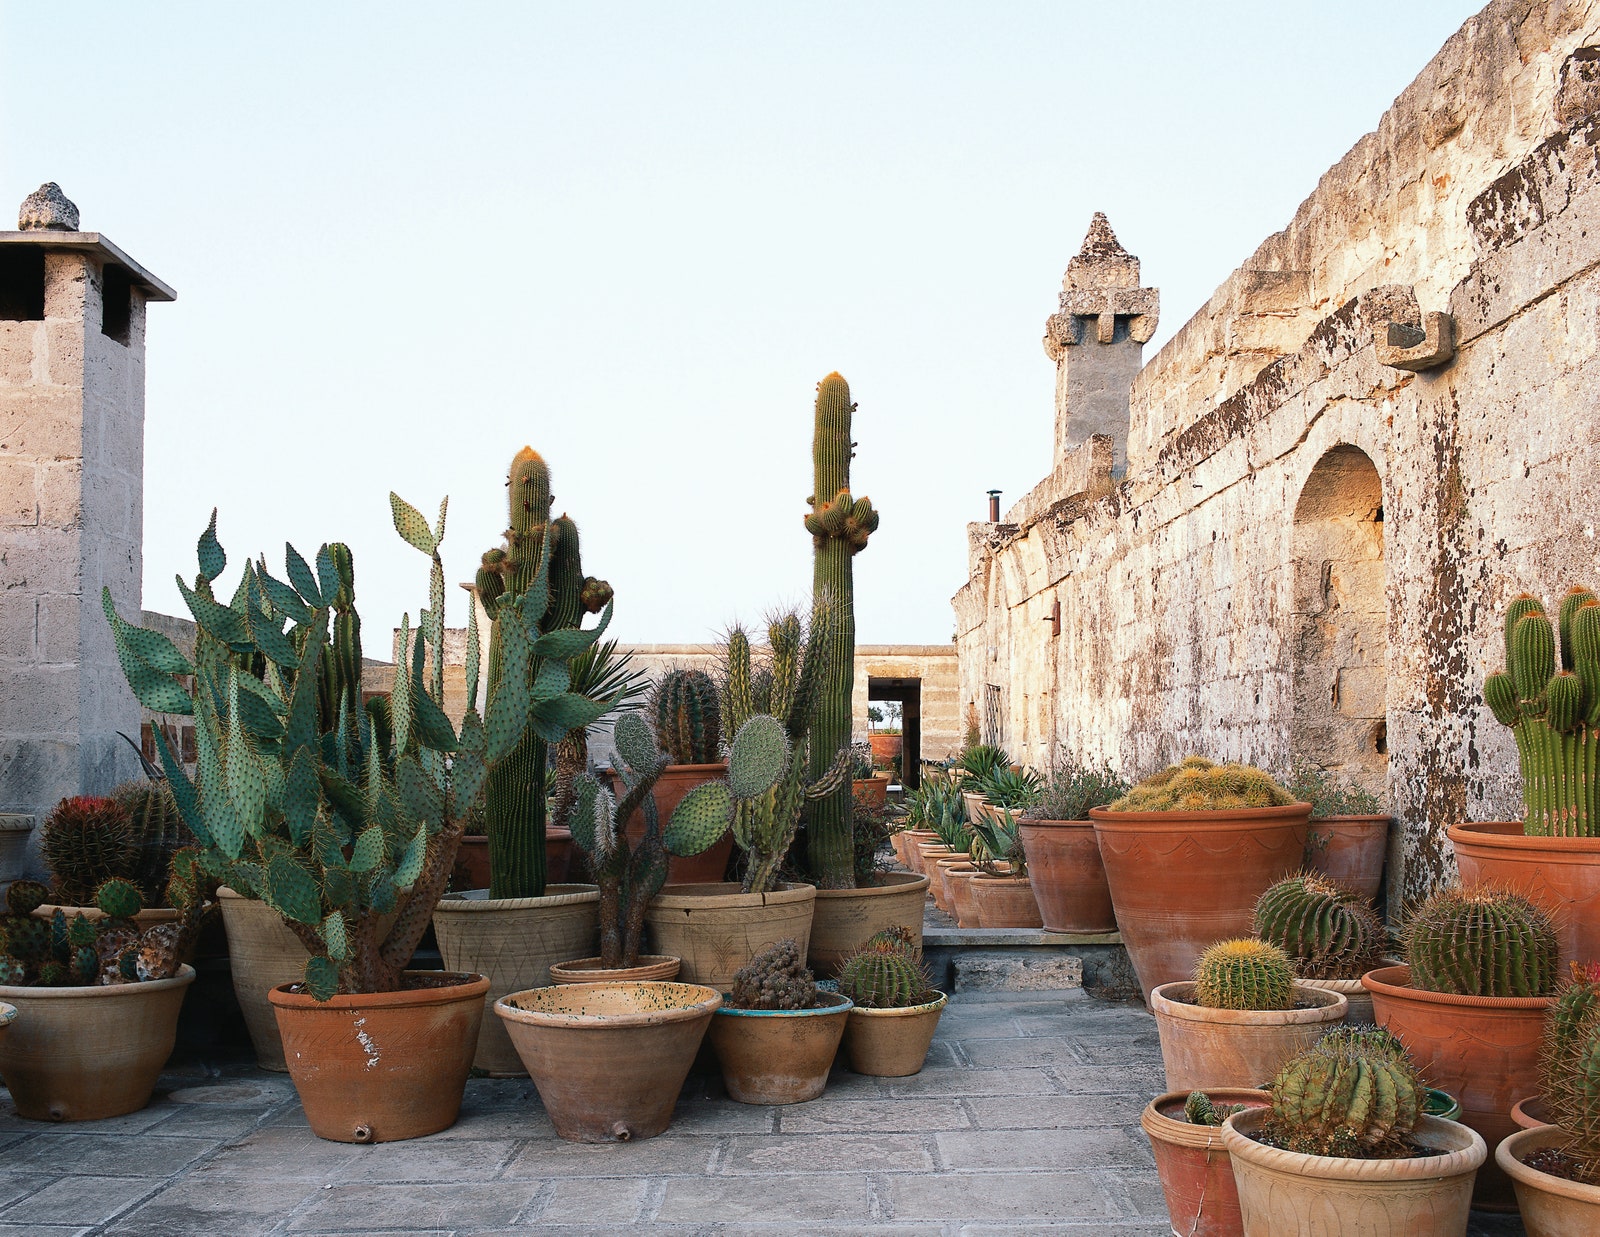 A horticultural habit flourishes within the walls of this convent